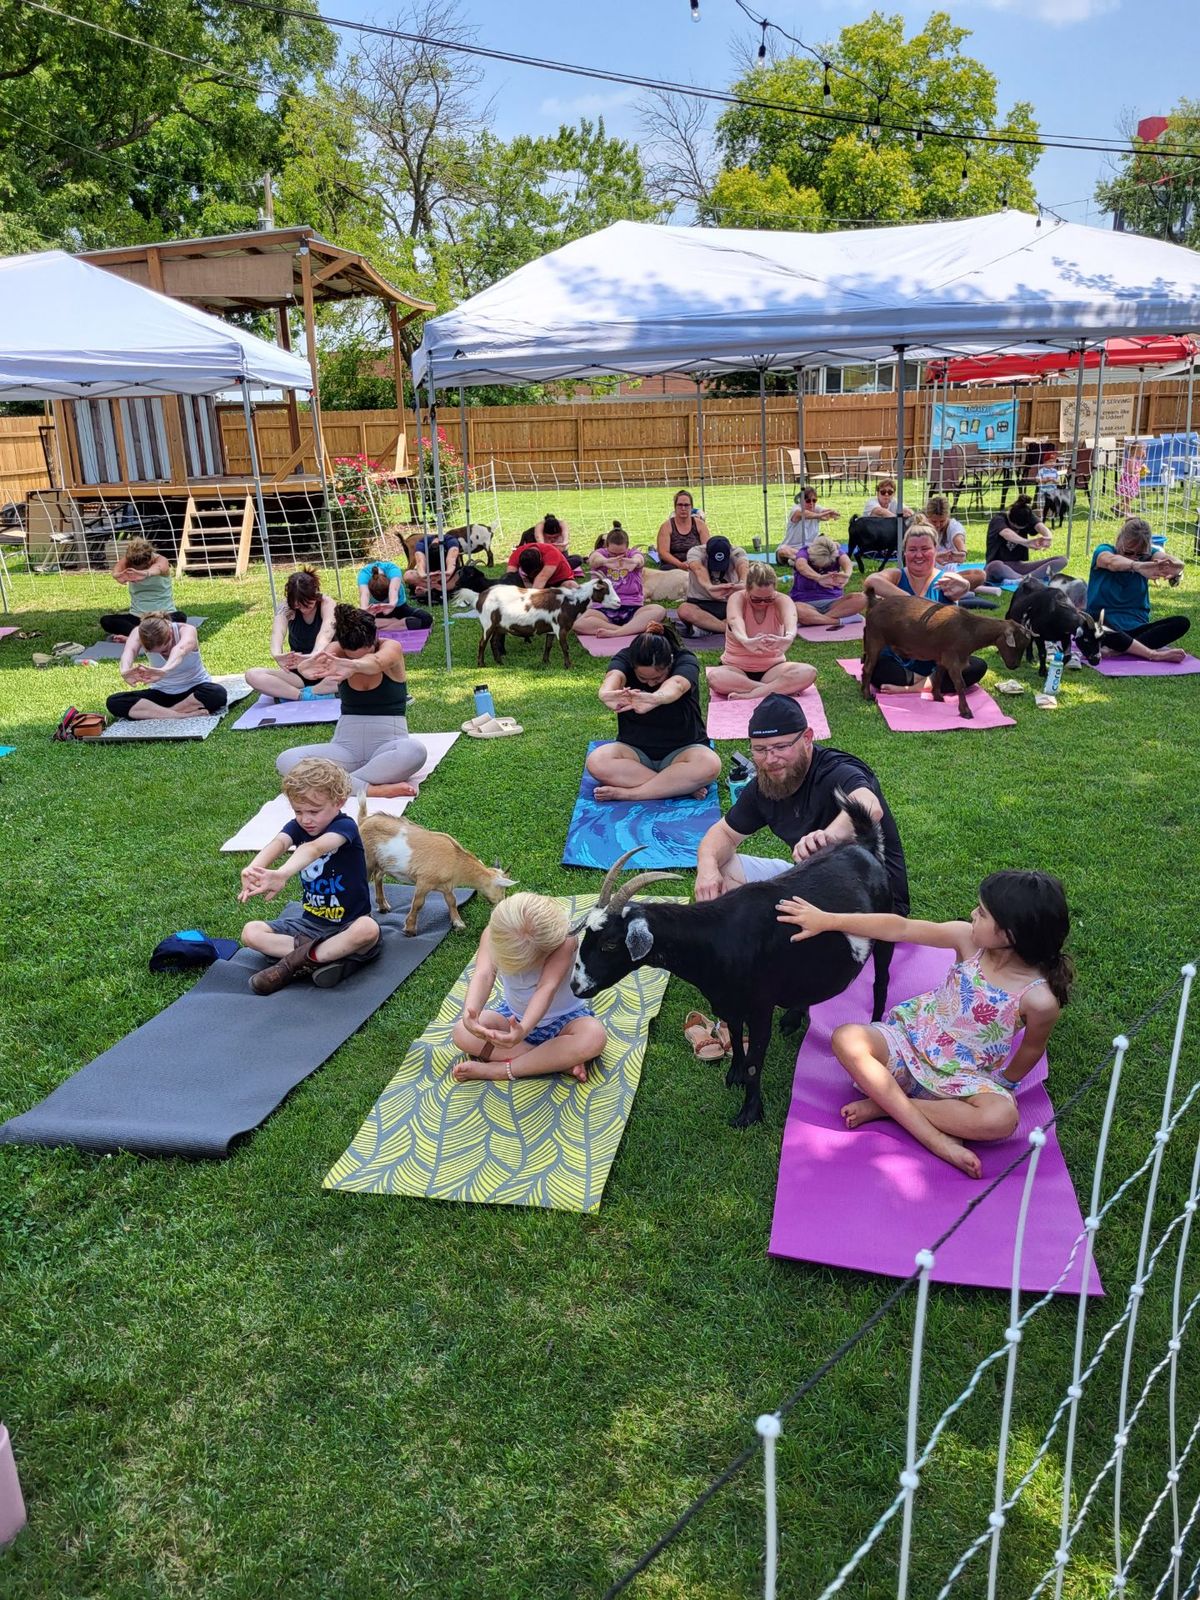 Goat Yoga at 311 Wine House & Beer Garden - St. Peters, MO